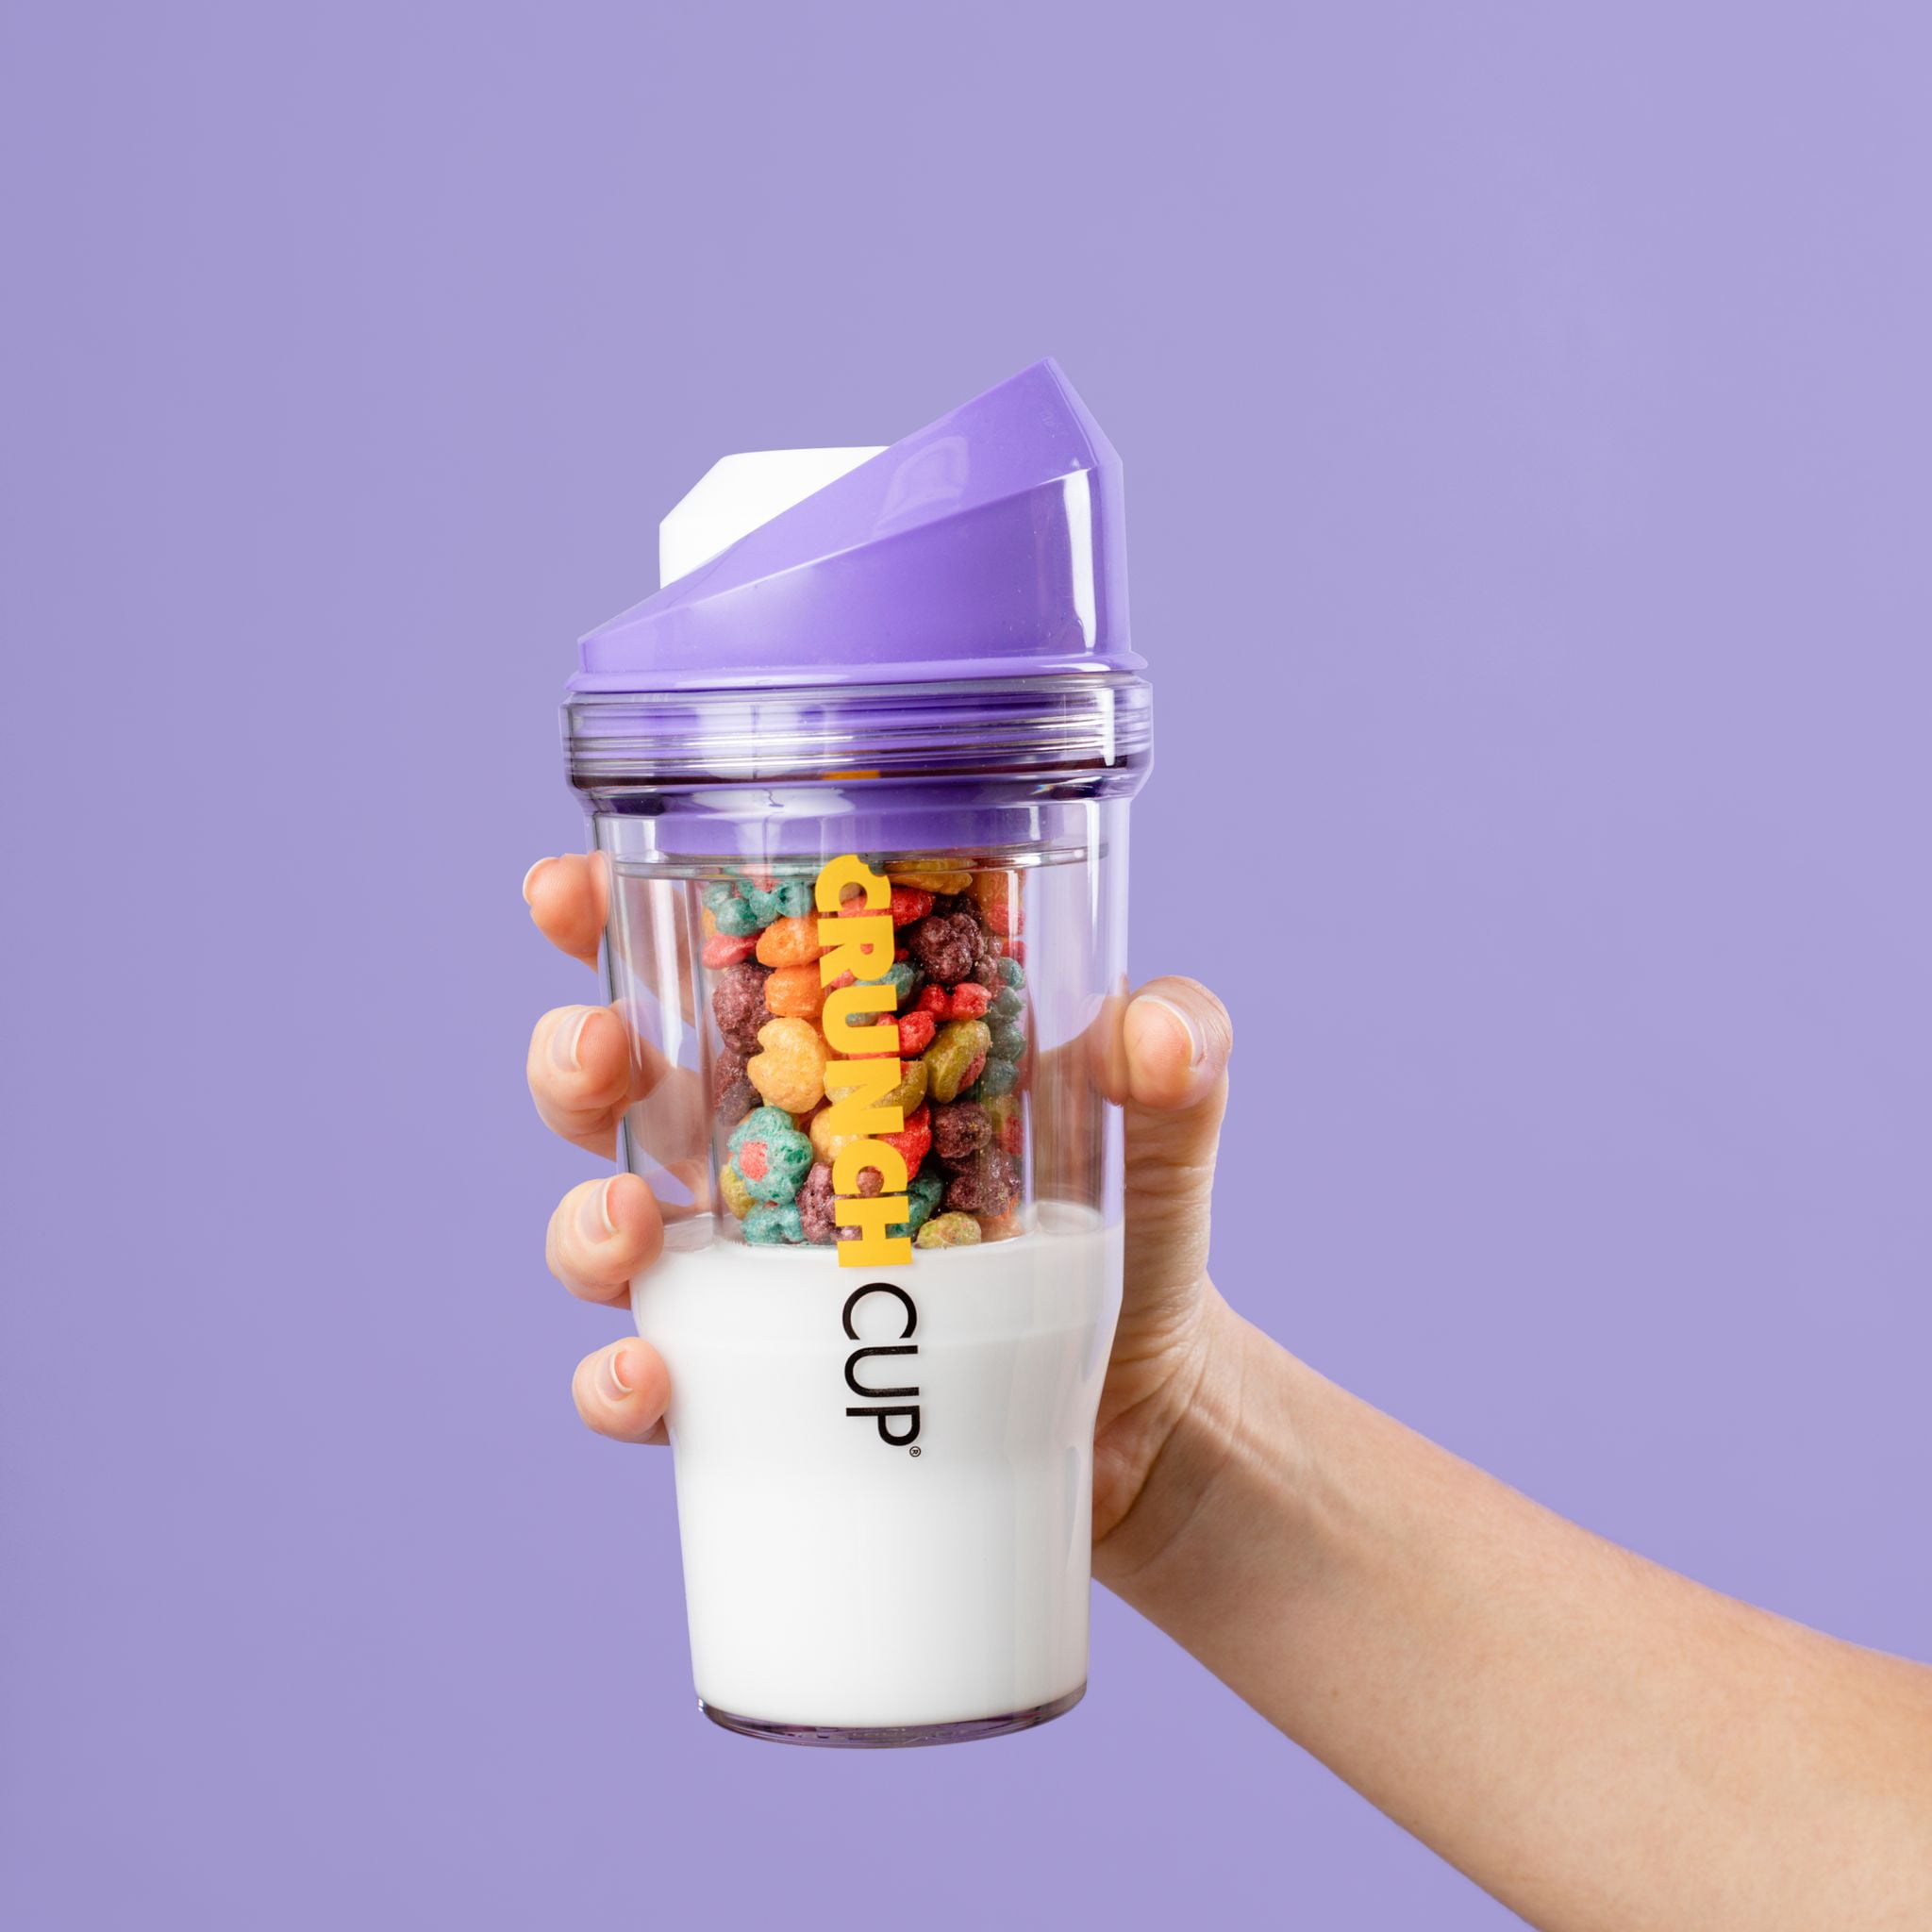  CRUNCHCUP XL Pink - Portable Plastic Cereal Cups for Breakfast  On the Go, To Go Cereal and Milk Container for your favorite Breakfast  Cereals, No Spoon or Bowl Required: Home 